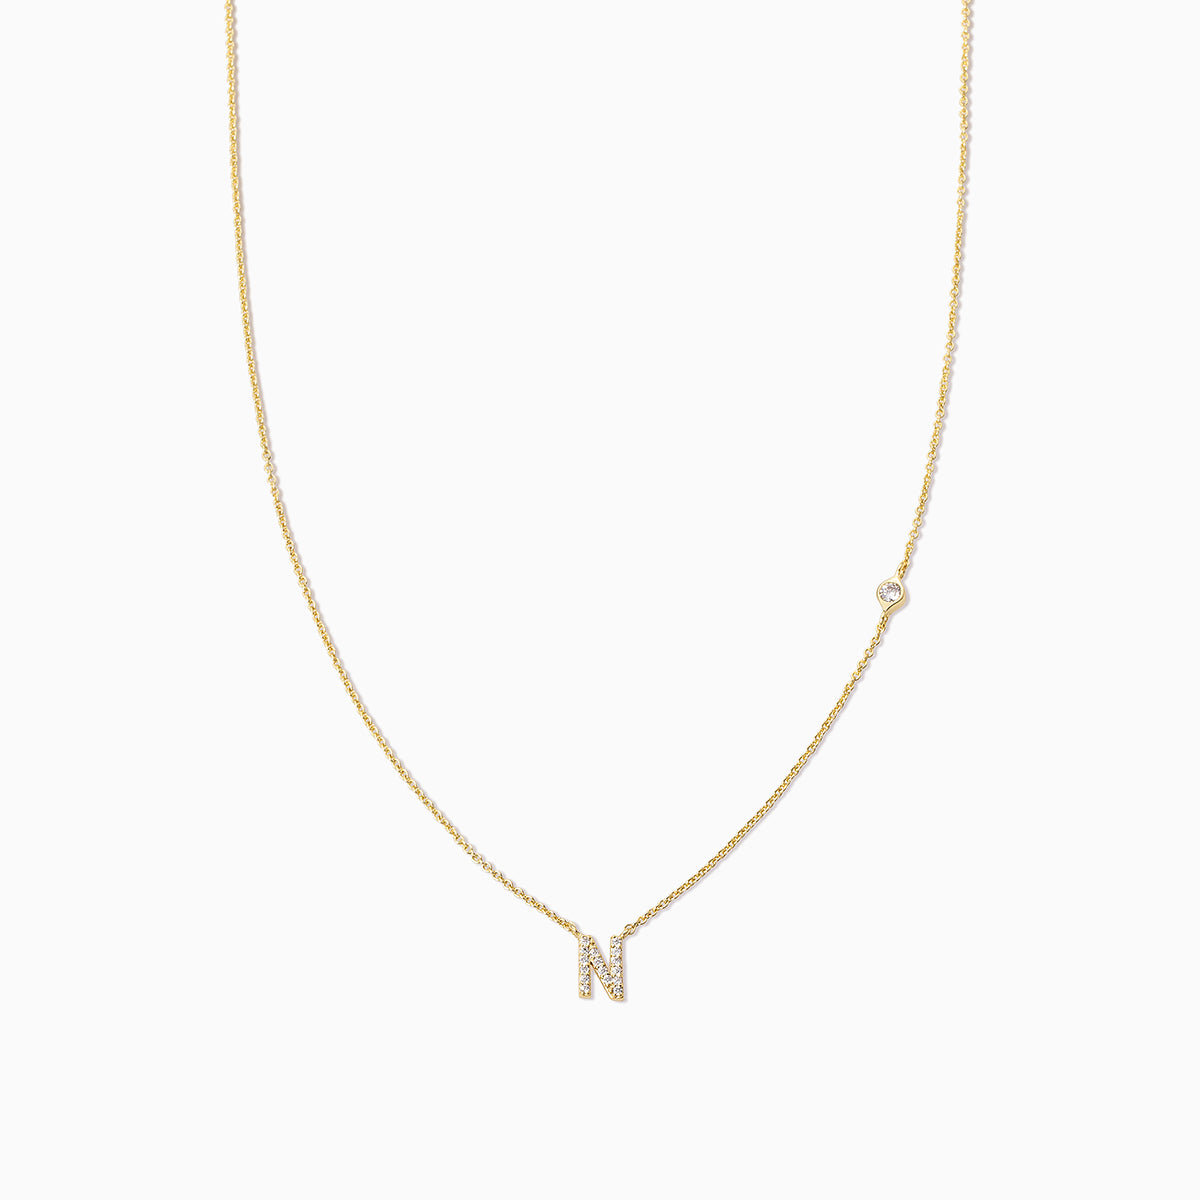 Pavé Initial Necklace | Gold N | Product Image | Uncommon James